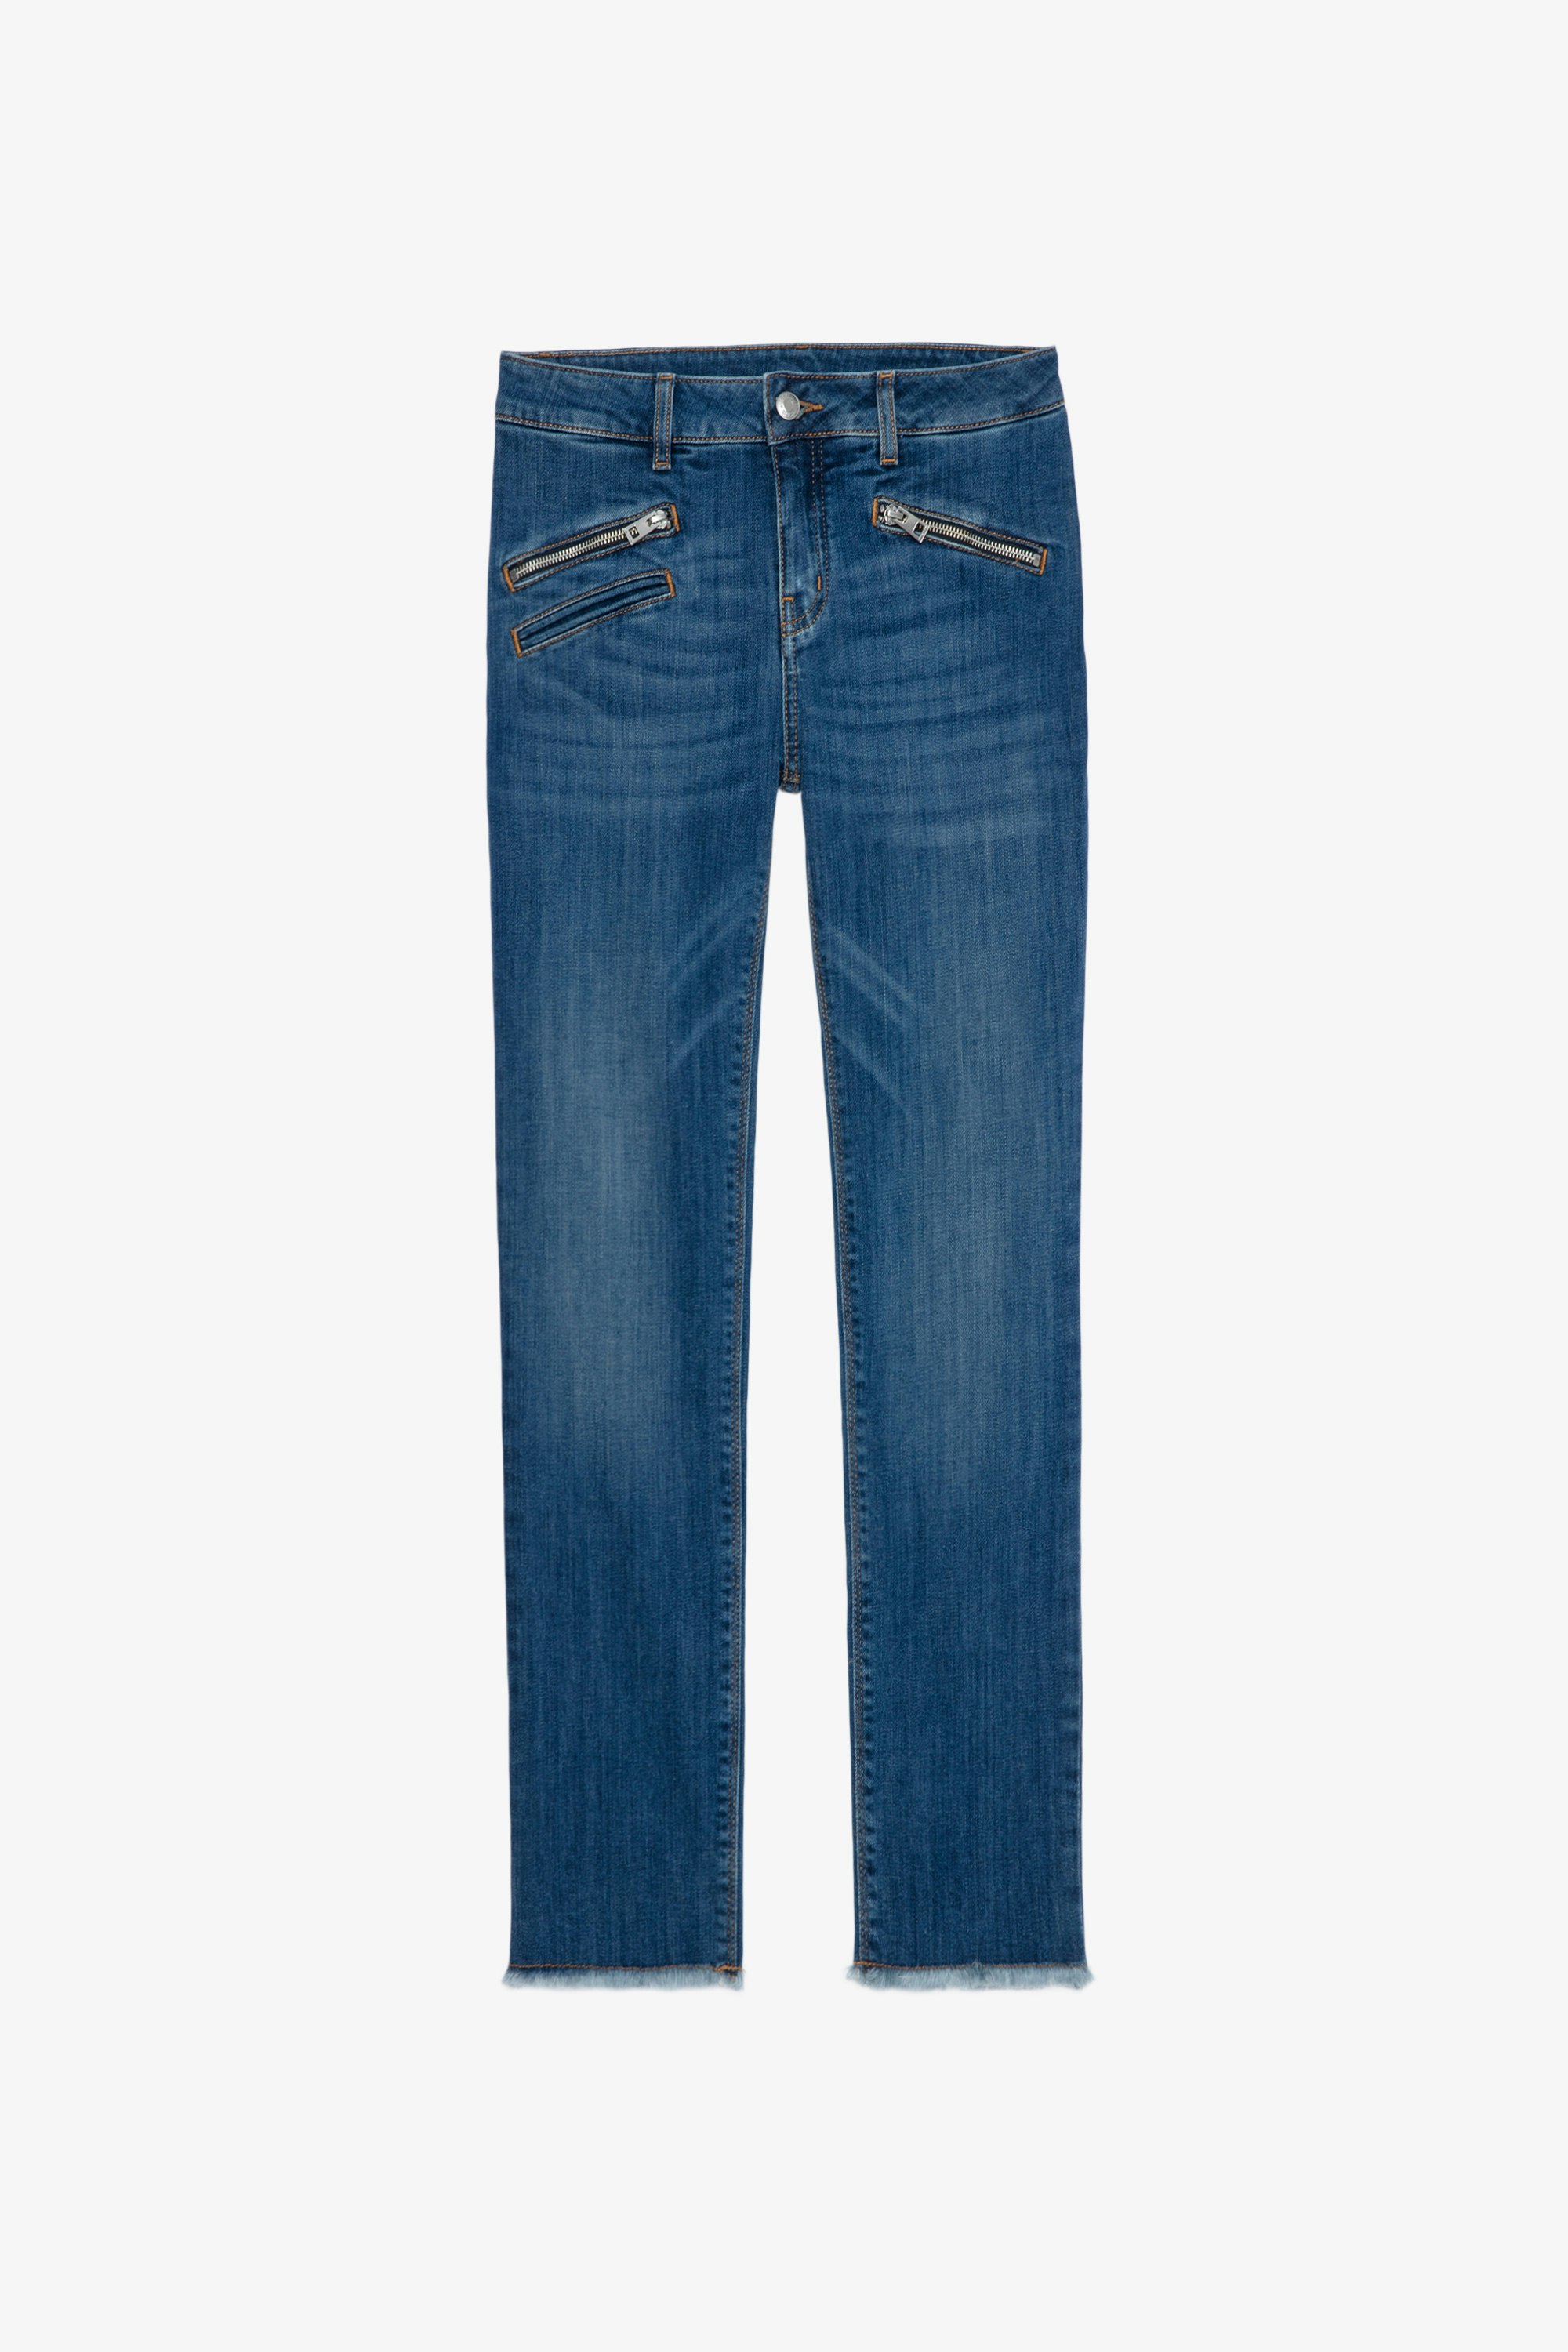 Ava Jeans Women's blue washed slim jeans.